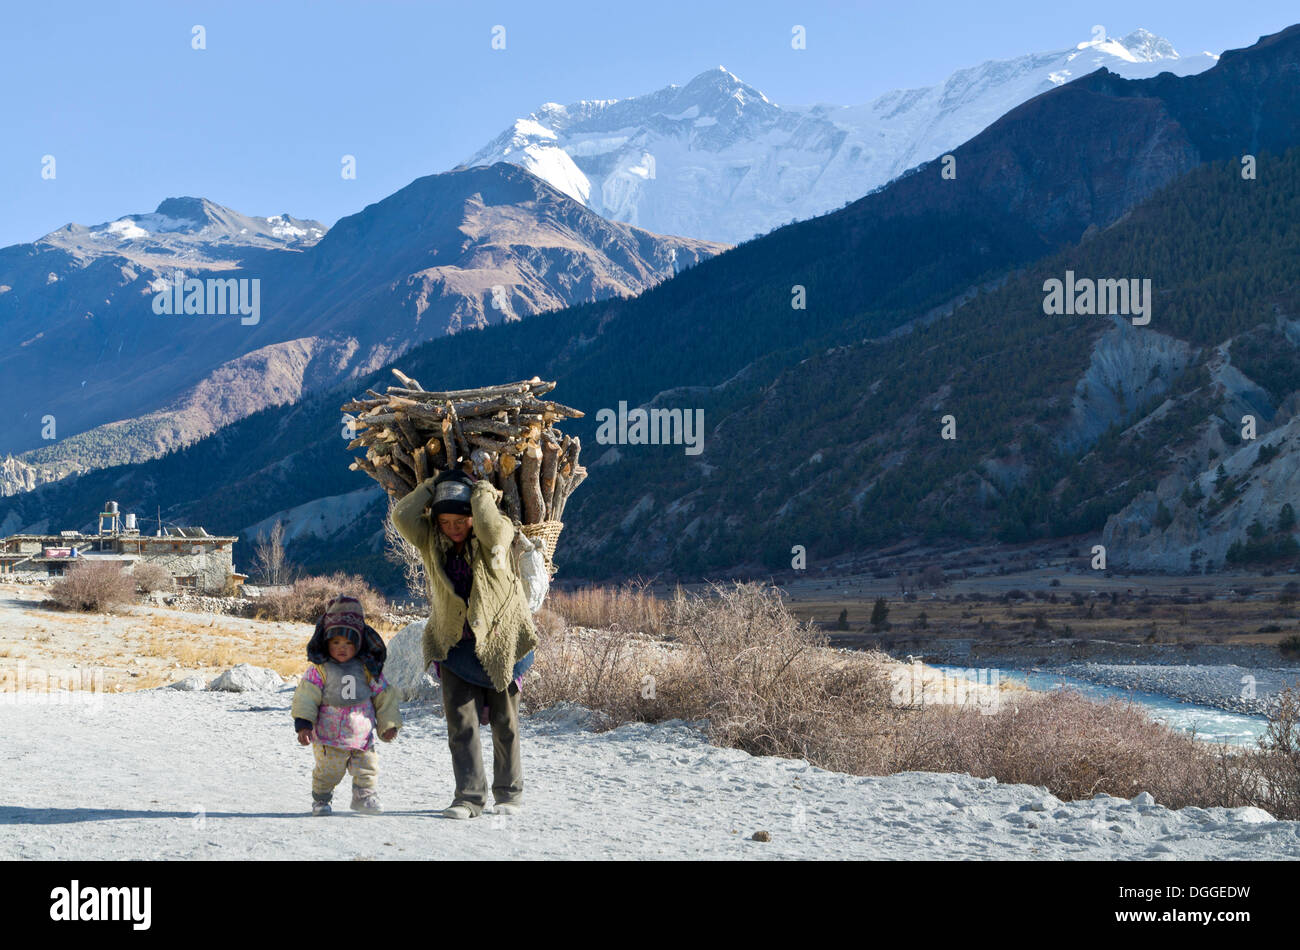 Woman walking with a small child, carrying firewood. Annapurna 2 and 4 in the back, Manang, Annapurna Region, Nepal Stock Photo